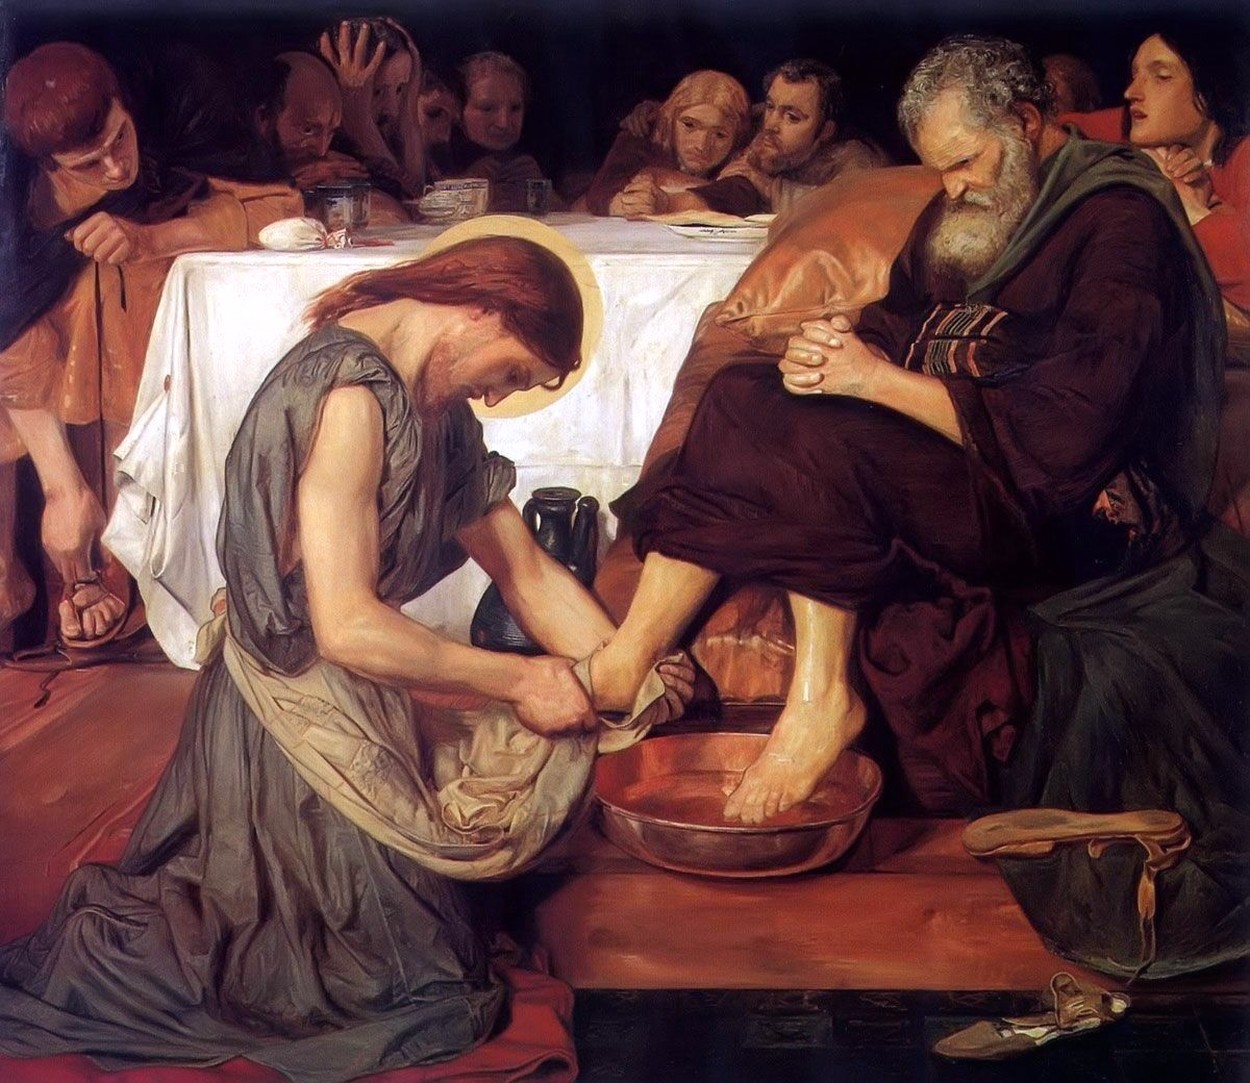 https://freechristimages.com/images-Christ-life/Christ-Washing-Peters-Feet-_Ford-Madox-Brown.jpg